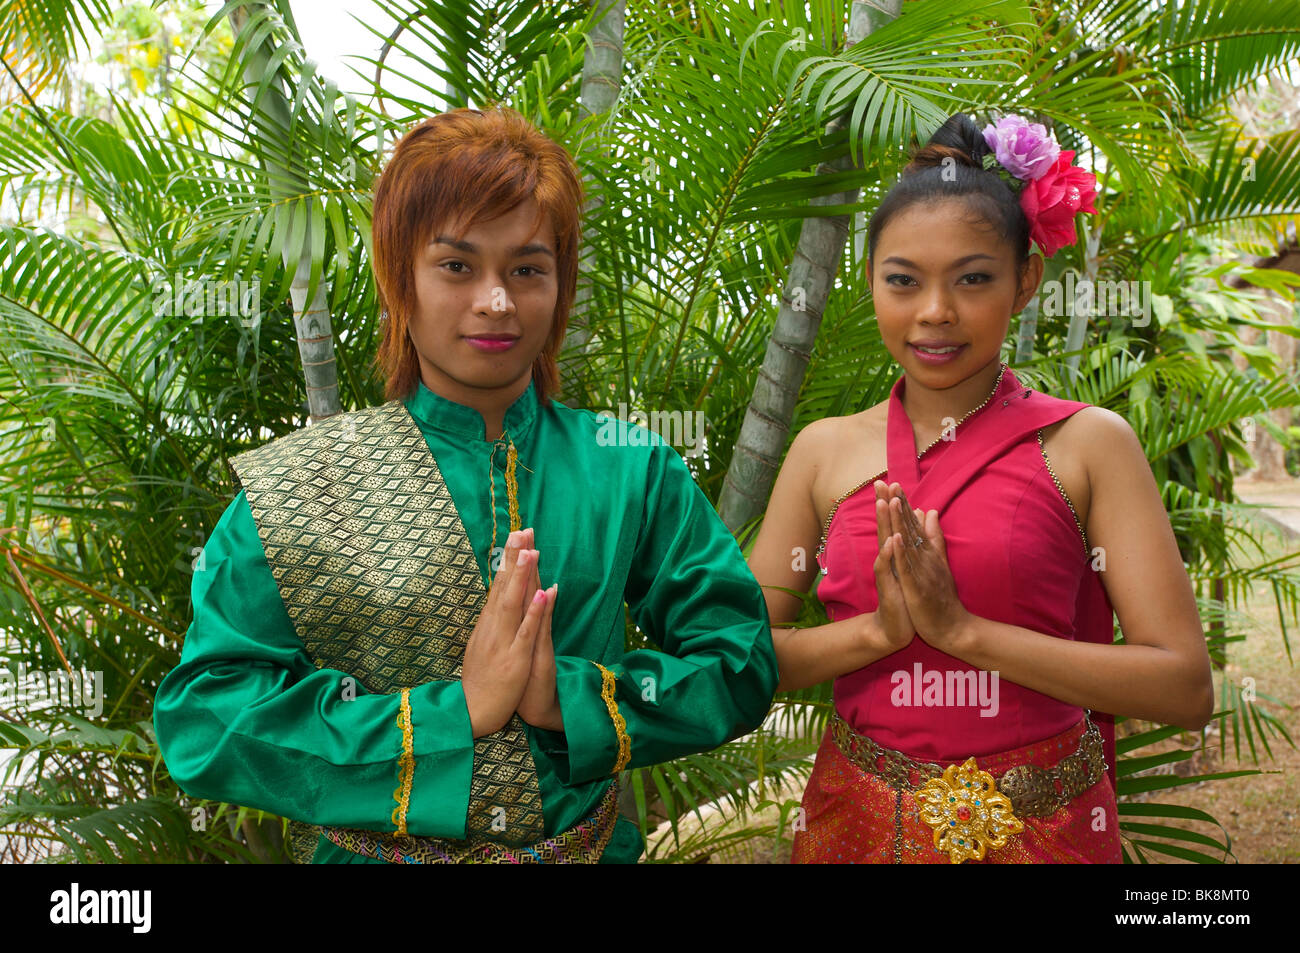 Typical local greeting, Thailand, Asia Stock Photo